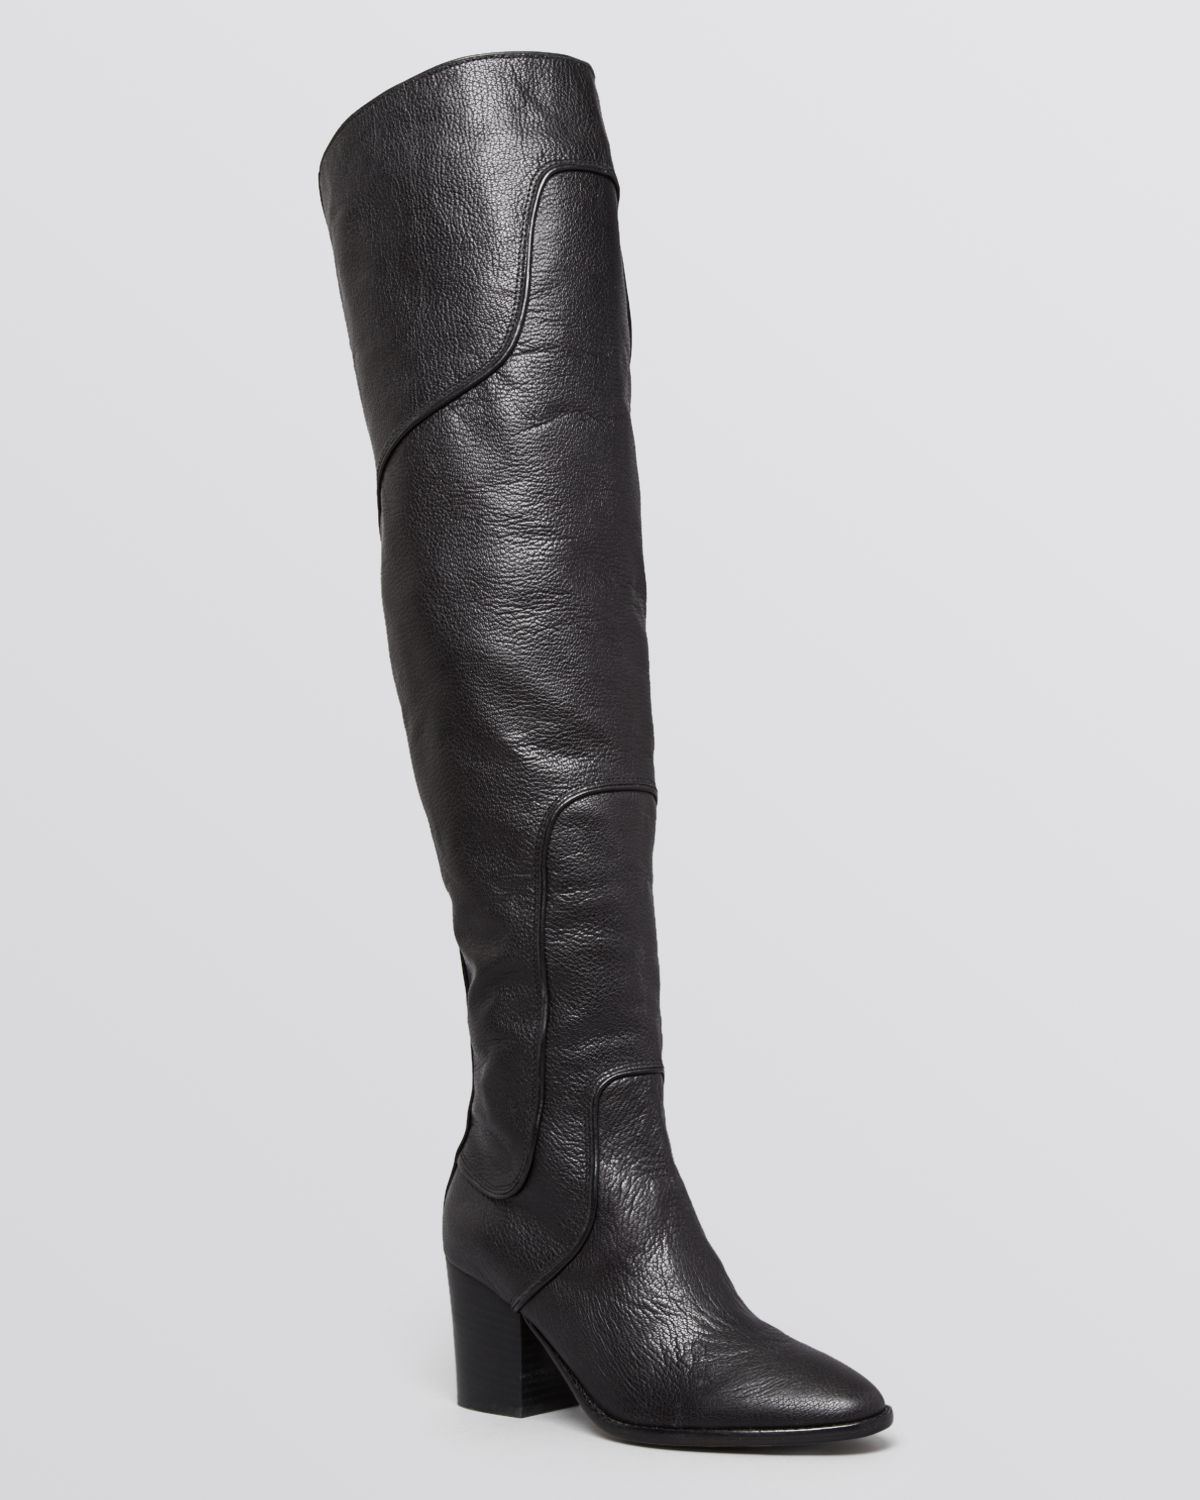 Rebecca Minkoff Over The Knee Boots - Blessing in Black | Lyst